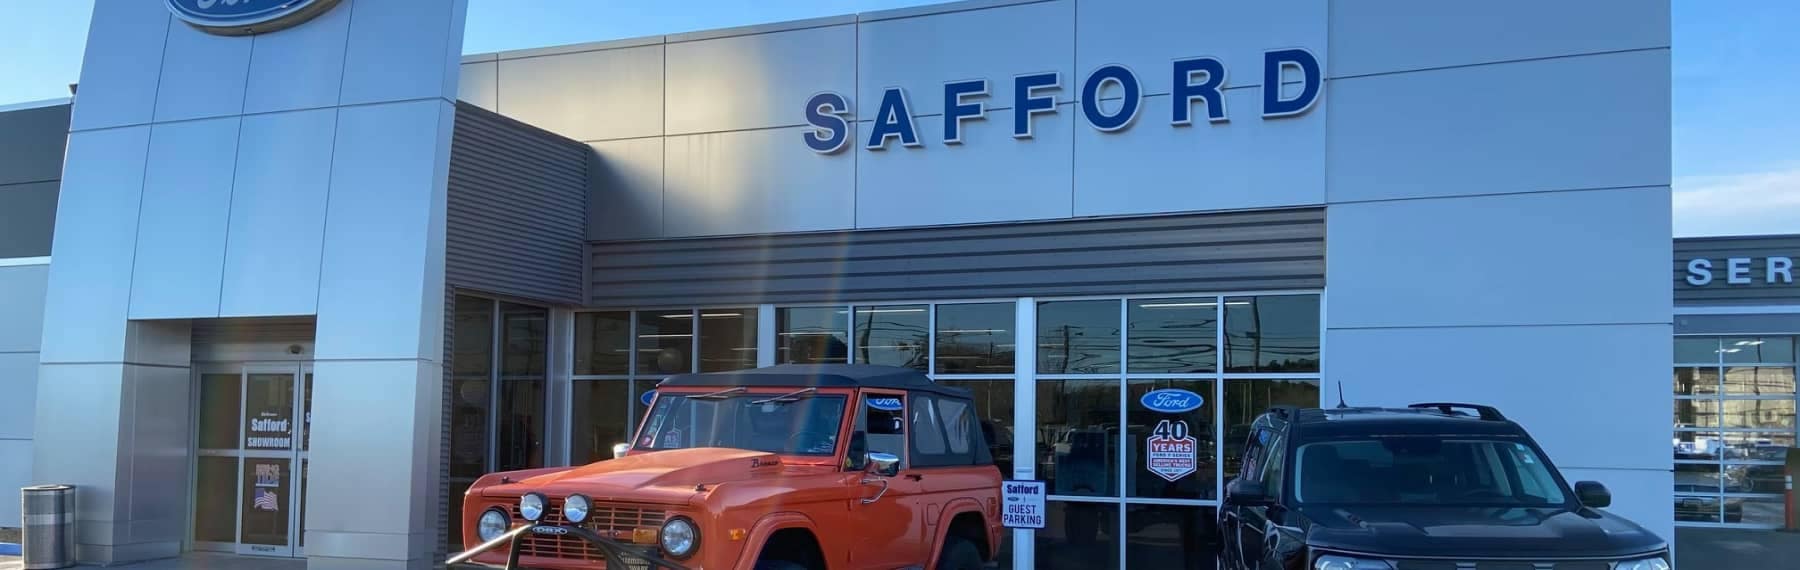 Safford Ford of Salisbury Storefront